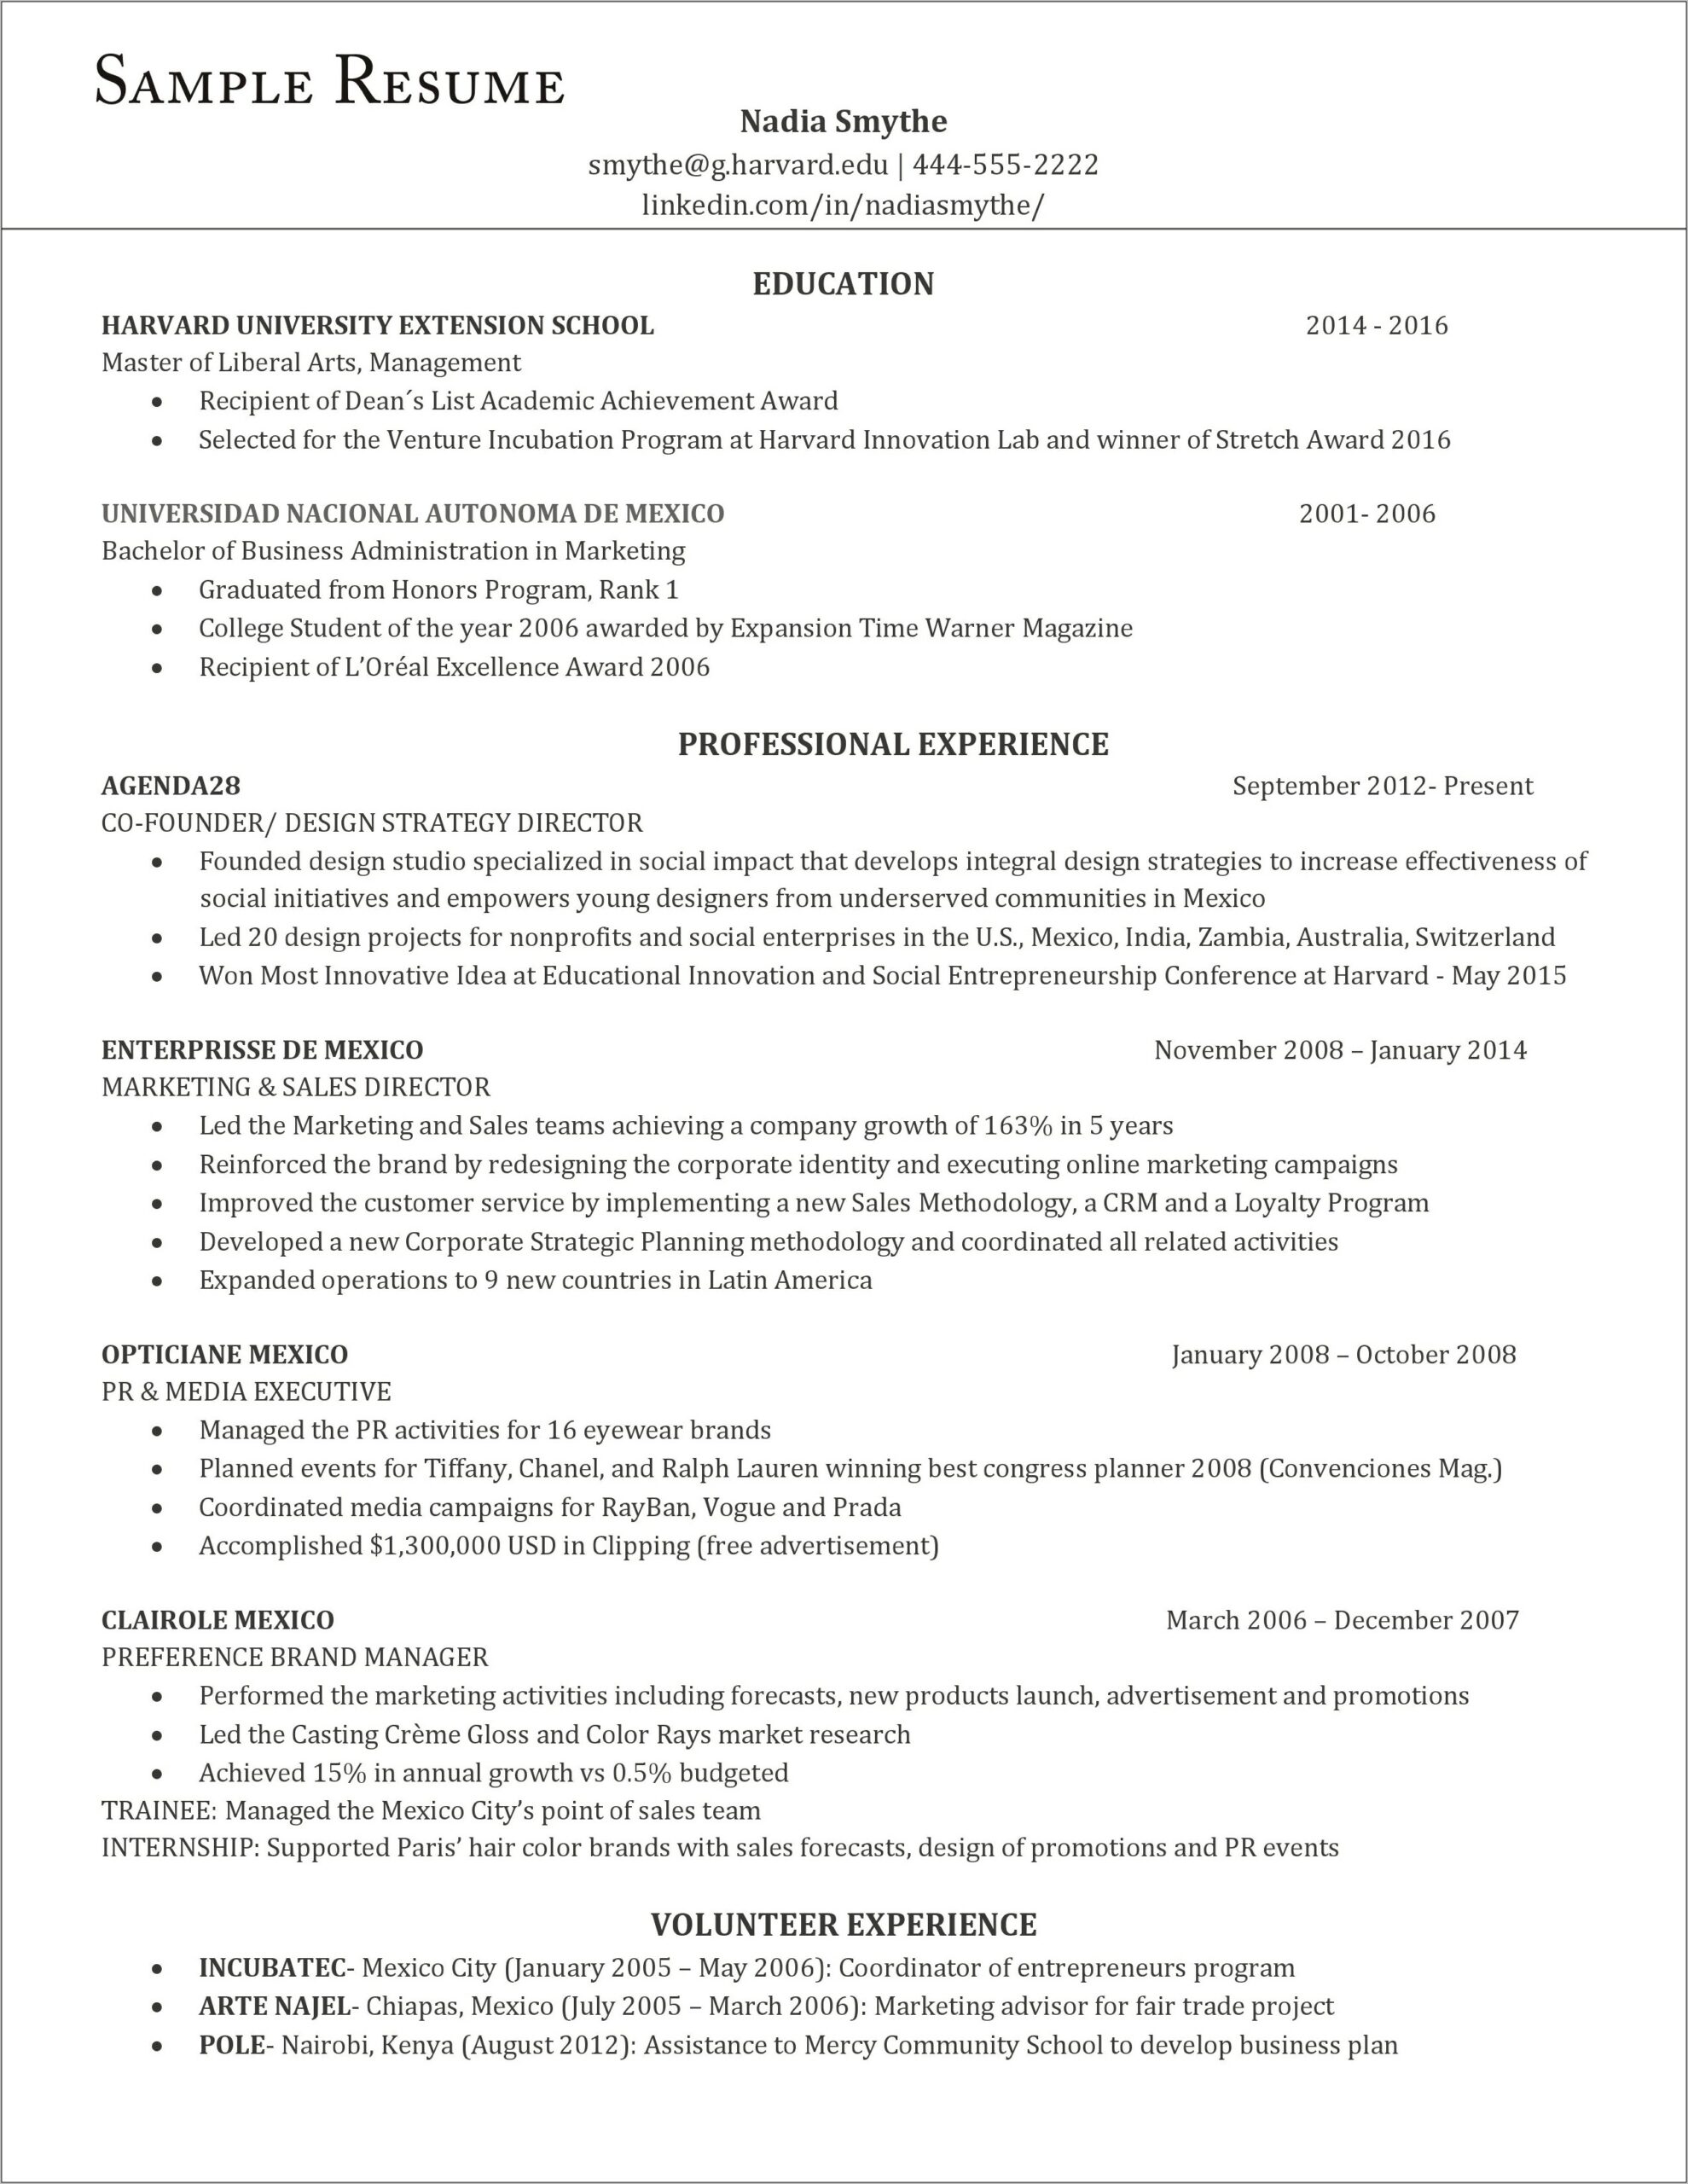 Resume To Get Into College Sample